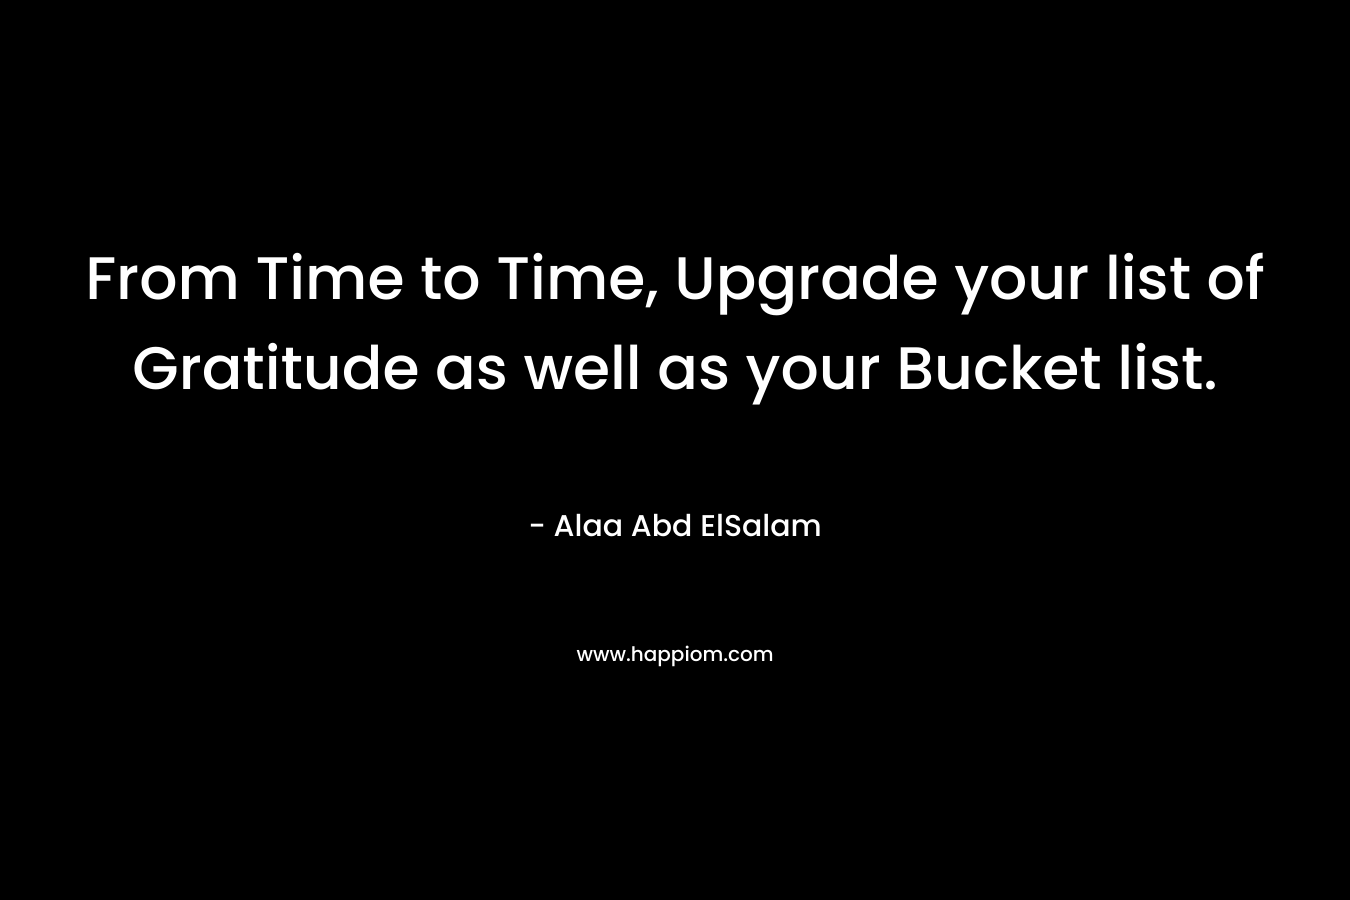 From Time to Time, Upgrade your list of Gratitude as well as your Bucket list. – Alaa Abd ElSalam